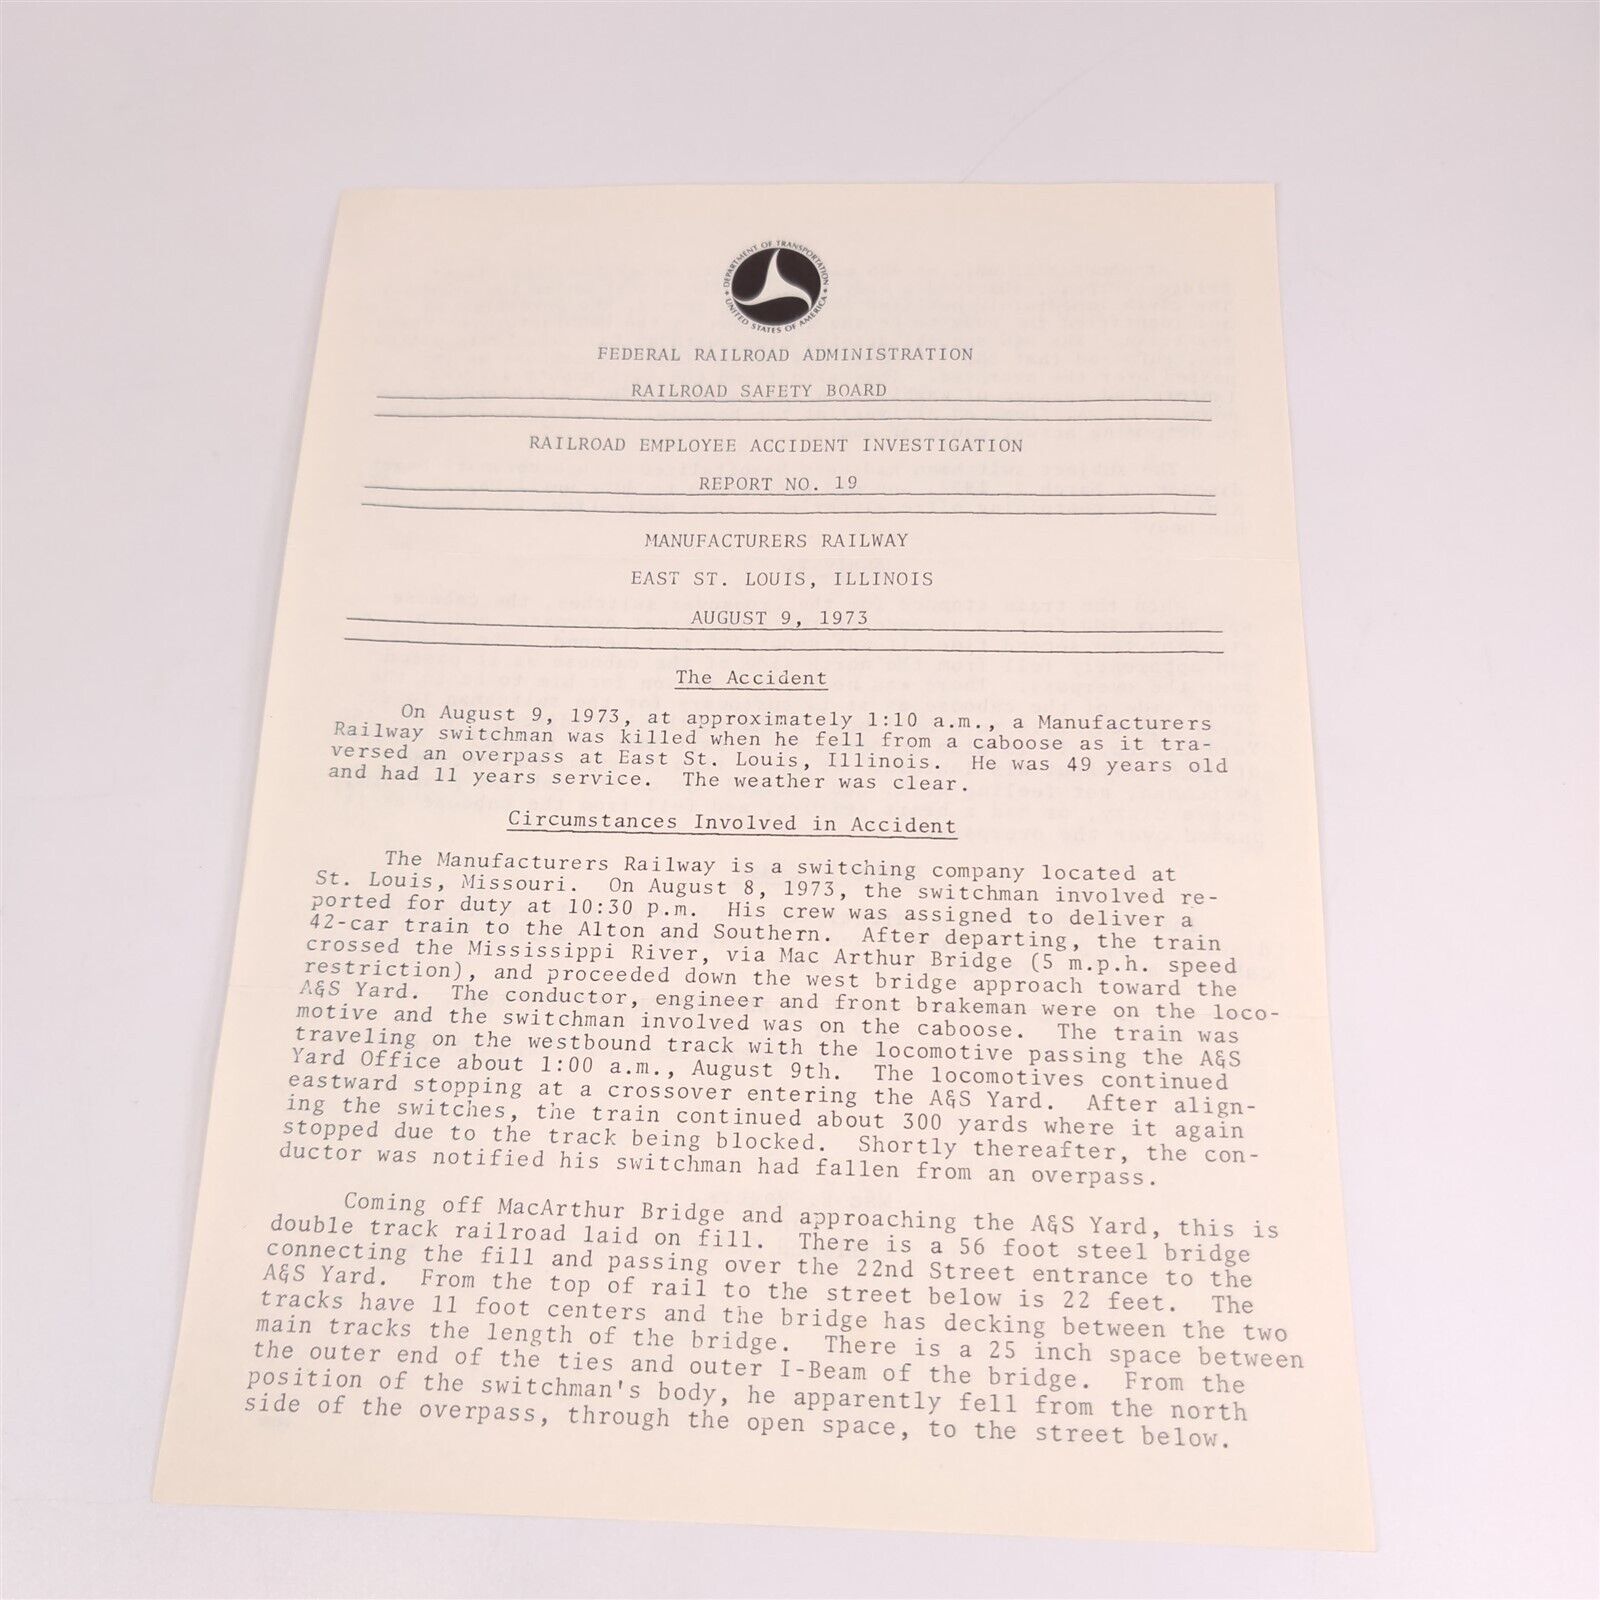 Accident Report Manufacturers Railway #19 1973 Federal Railroad Administration